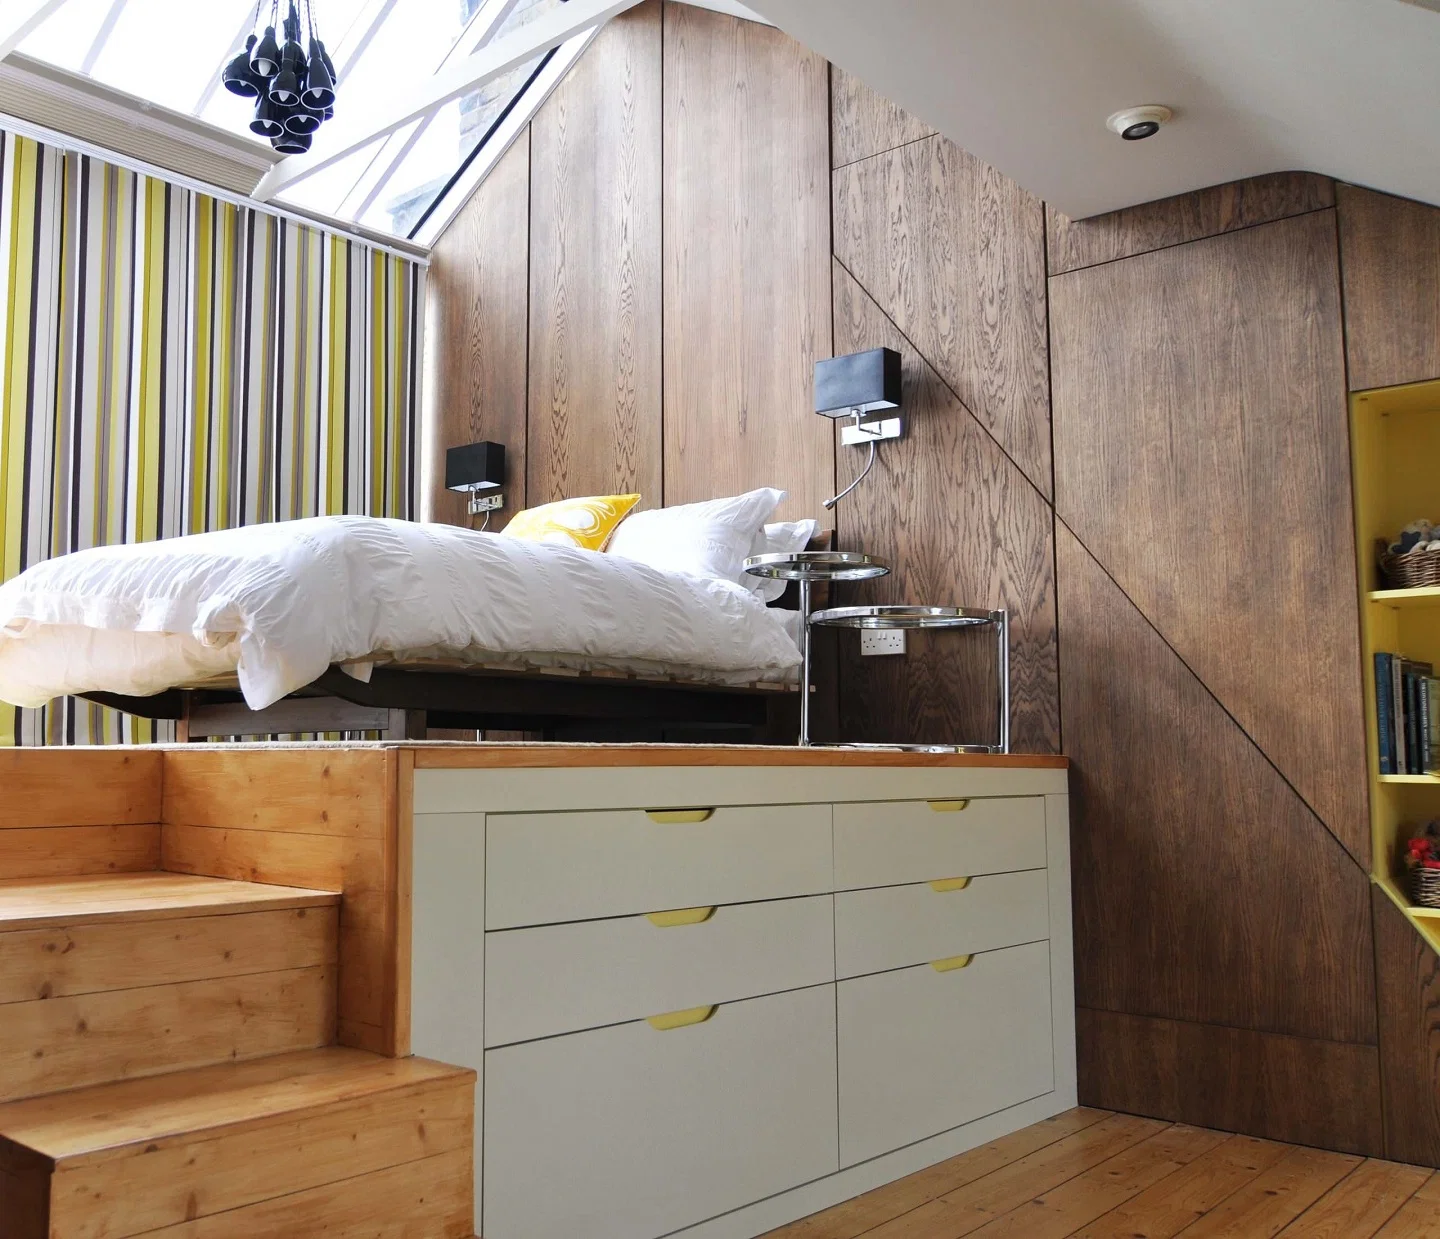  2. Loft Rooms Smart Storage Solutions for Clutter-Free Living